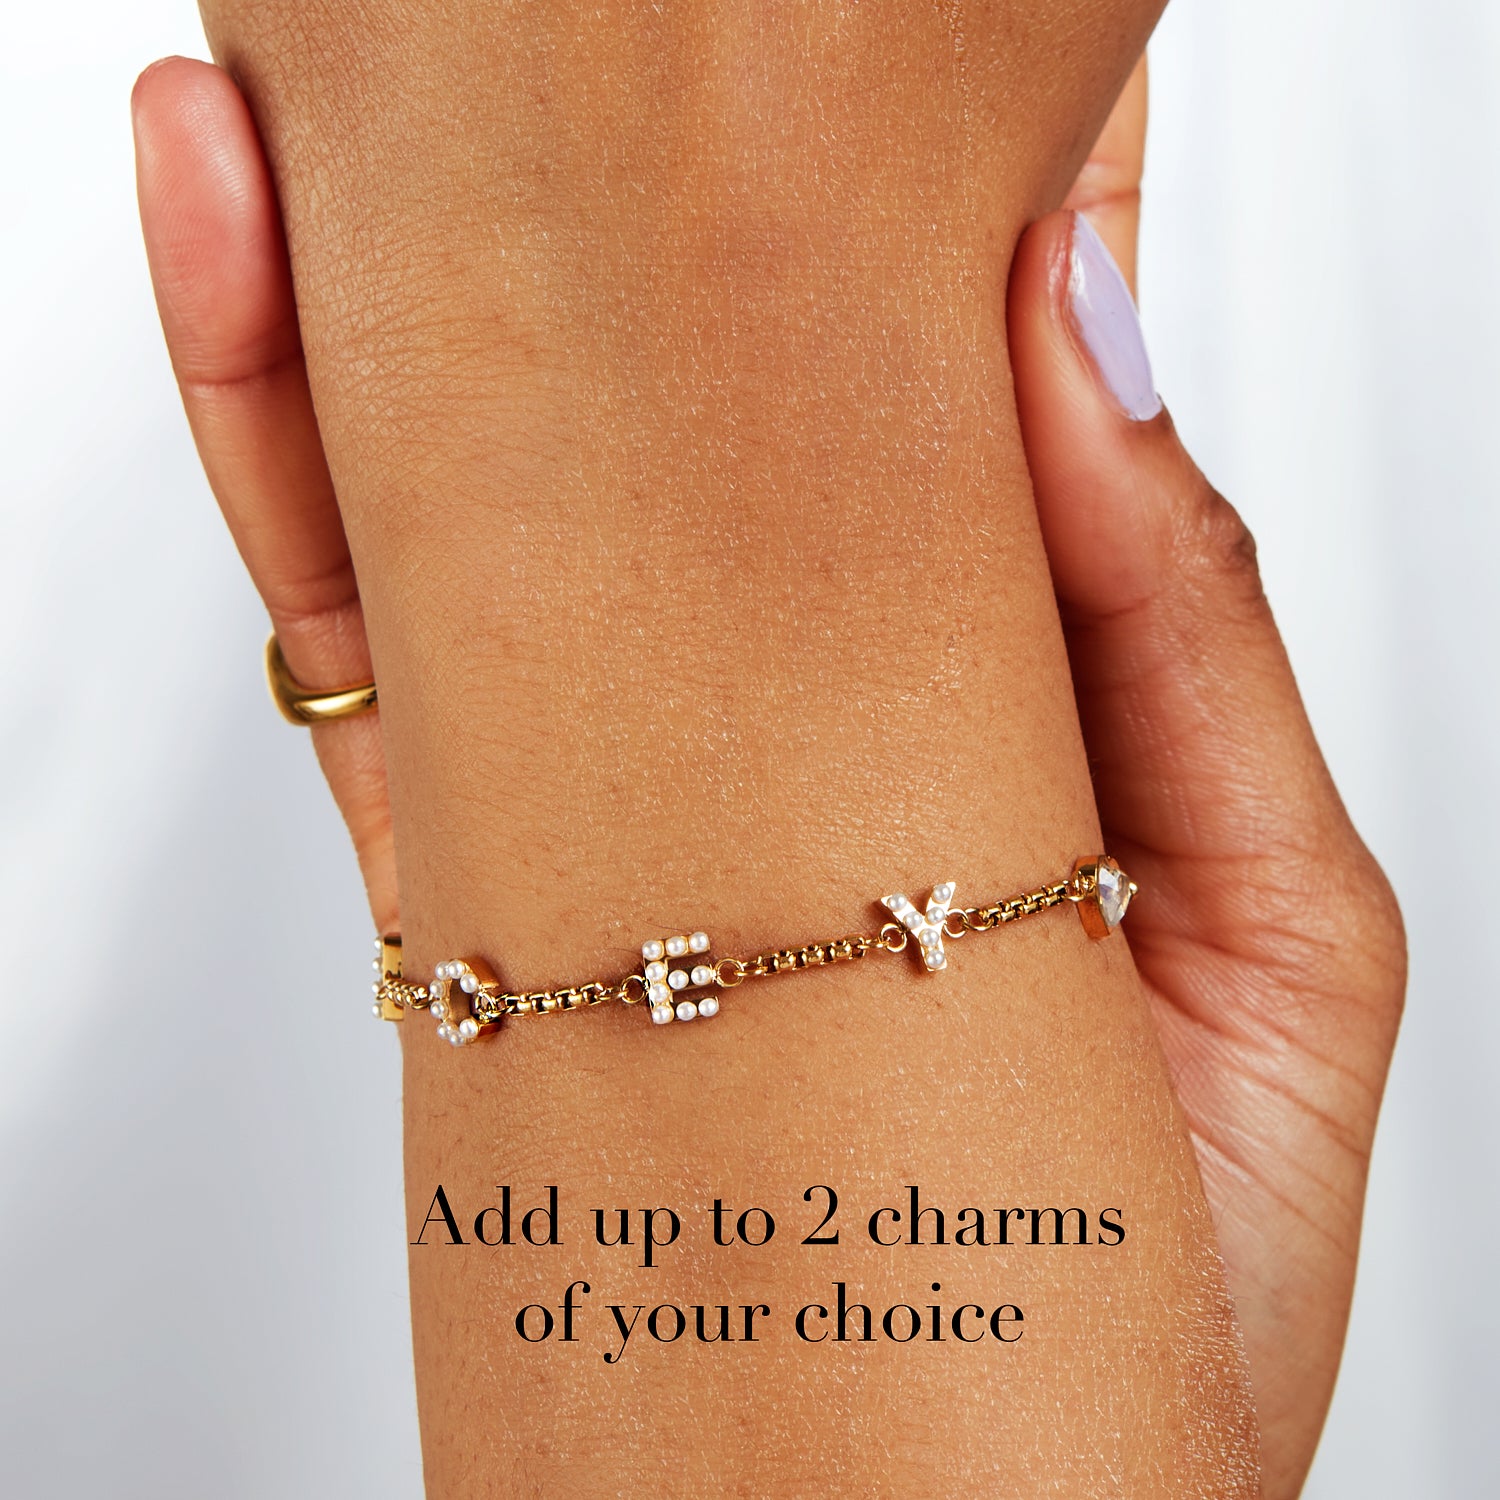 Custom Design Your Own Charm Bracelet Expandable Bangle Personalized  Jewelry Pick Your Charms